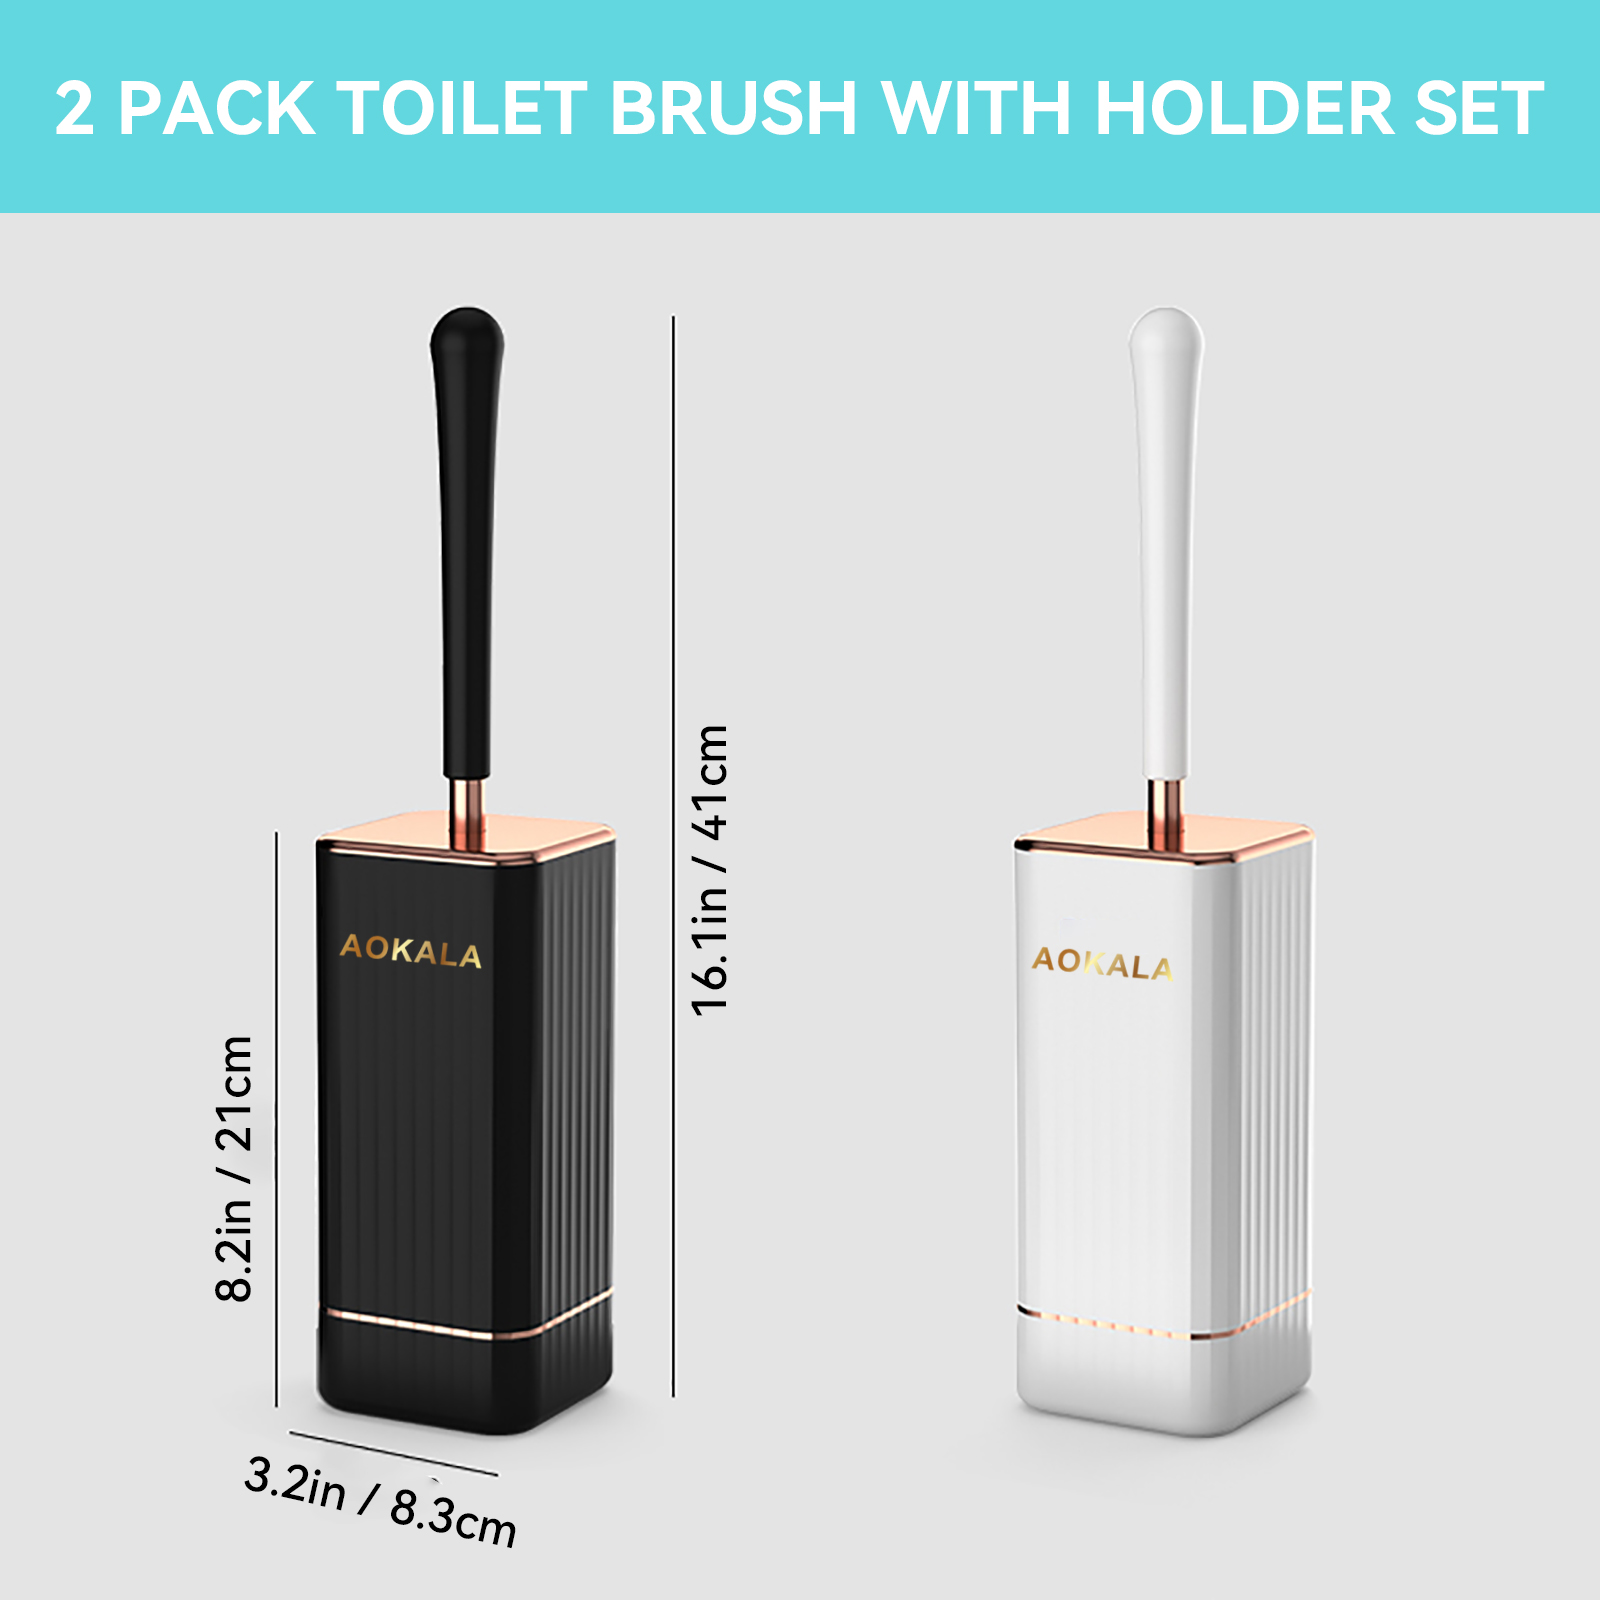 Aokala Silicone Toilet Brush Set, 2 Pack Toilet Bowl Brush and Holder with  Tweezers Long Handle, Toilet Cleaner Brush for Bathroom Deep Cleaning